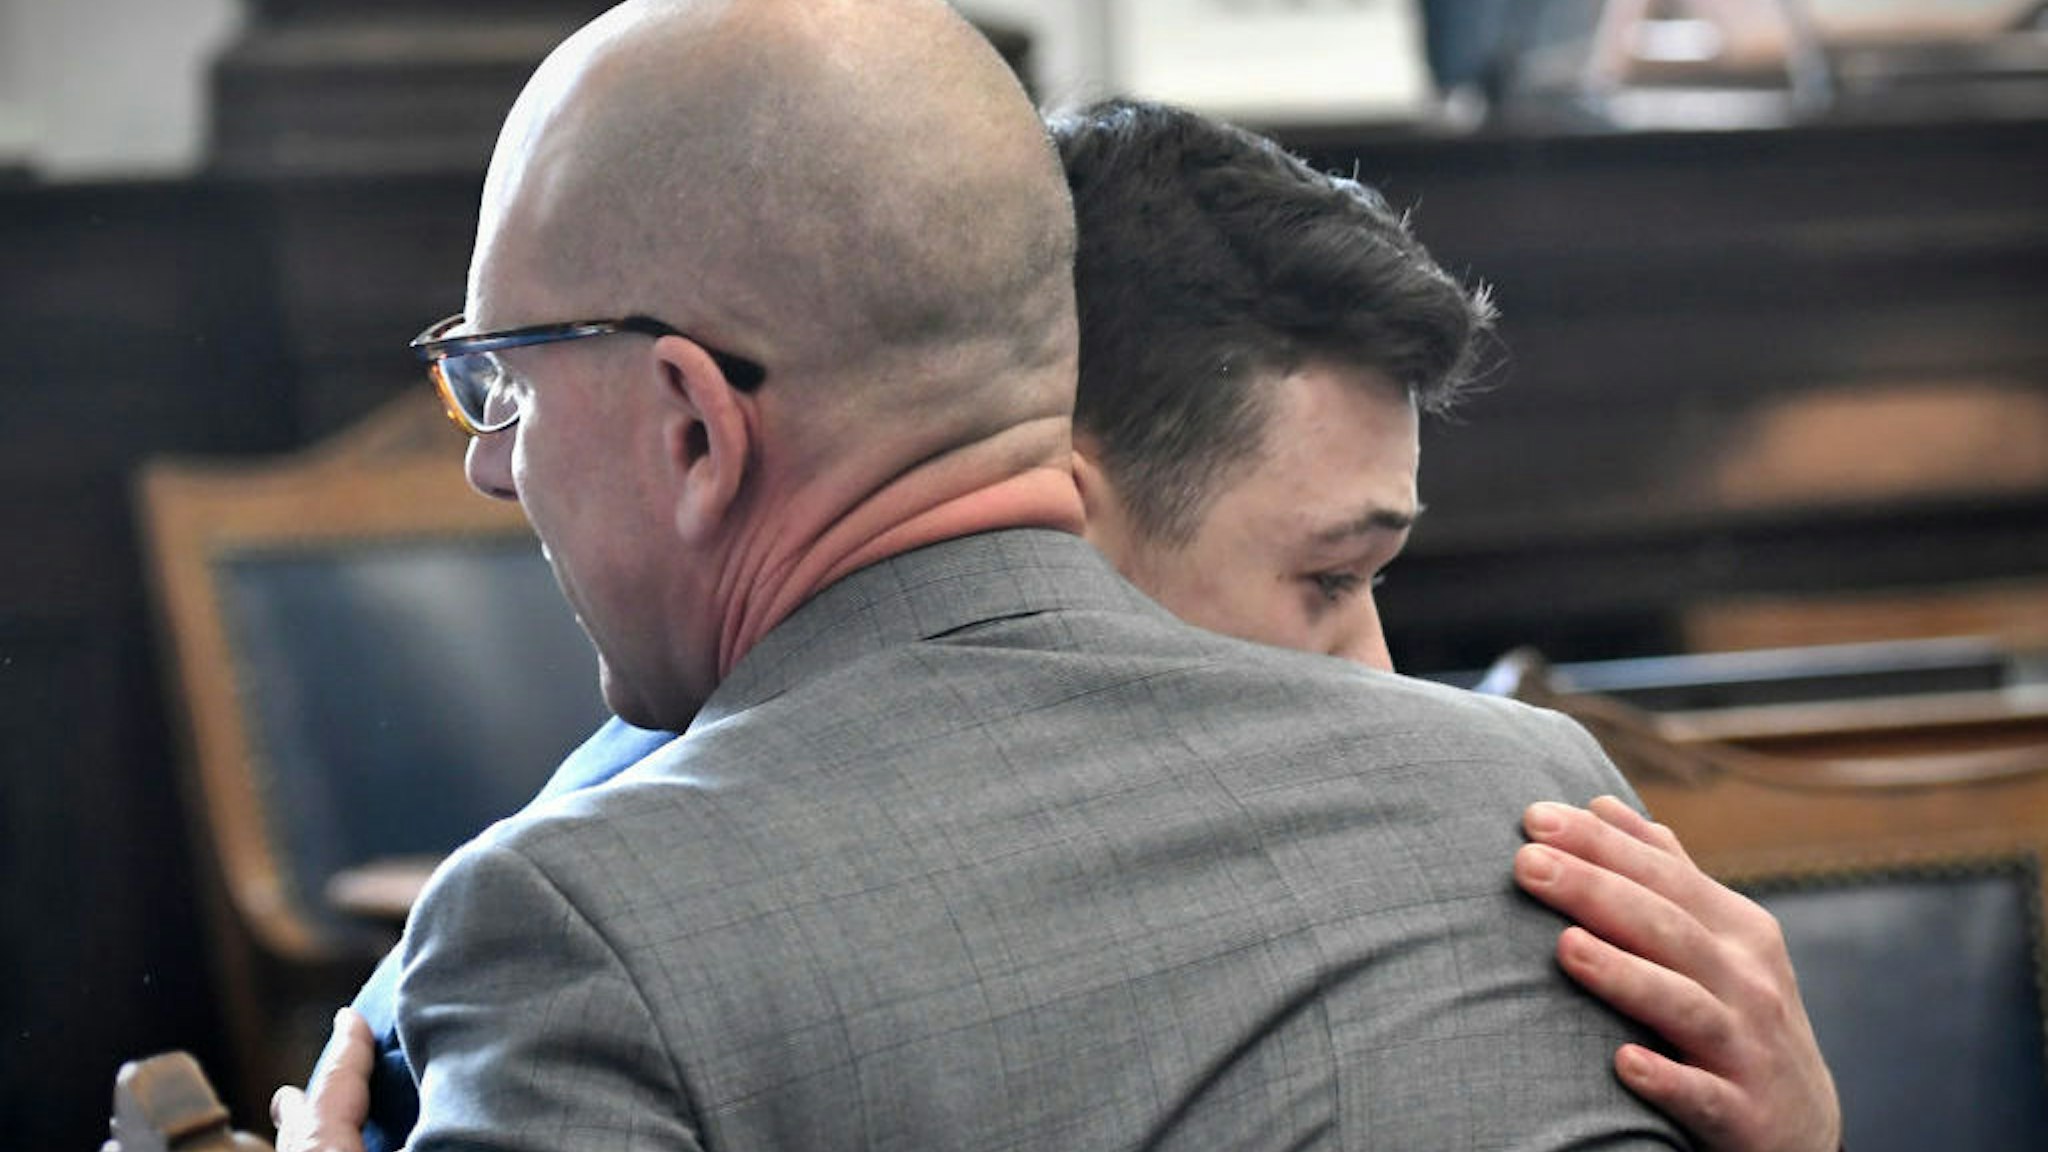 KENOSHA, WISCONSIN - NOVEMBER 19: Kyle Rittenhouse hugs one of his attorneys, Corey Chirafisi, after he is found not guilty in his trial at the Kenosha County Courthouse on November 19, 2021 in Kenosha, Wisconsin. Rittenhouse was found not guilty of all charges in the shooting of three demonstrators, killing two of them, during a night of unrest that erupted in Kenosha after a police officer shot Jacob Blake seven times in the back while being arrested in August 2020. Rittenhouse, from Antioch, Illinois, claimed self-defense who at the time of the shooting was armed with an assault rifle. (Photo by Sean Krajacic - Pool/Getty Images)